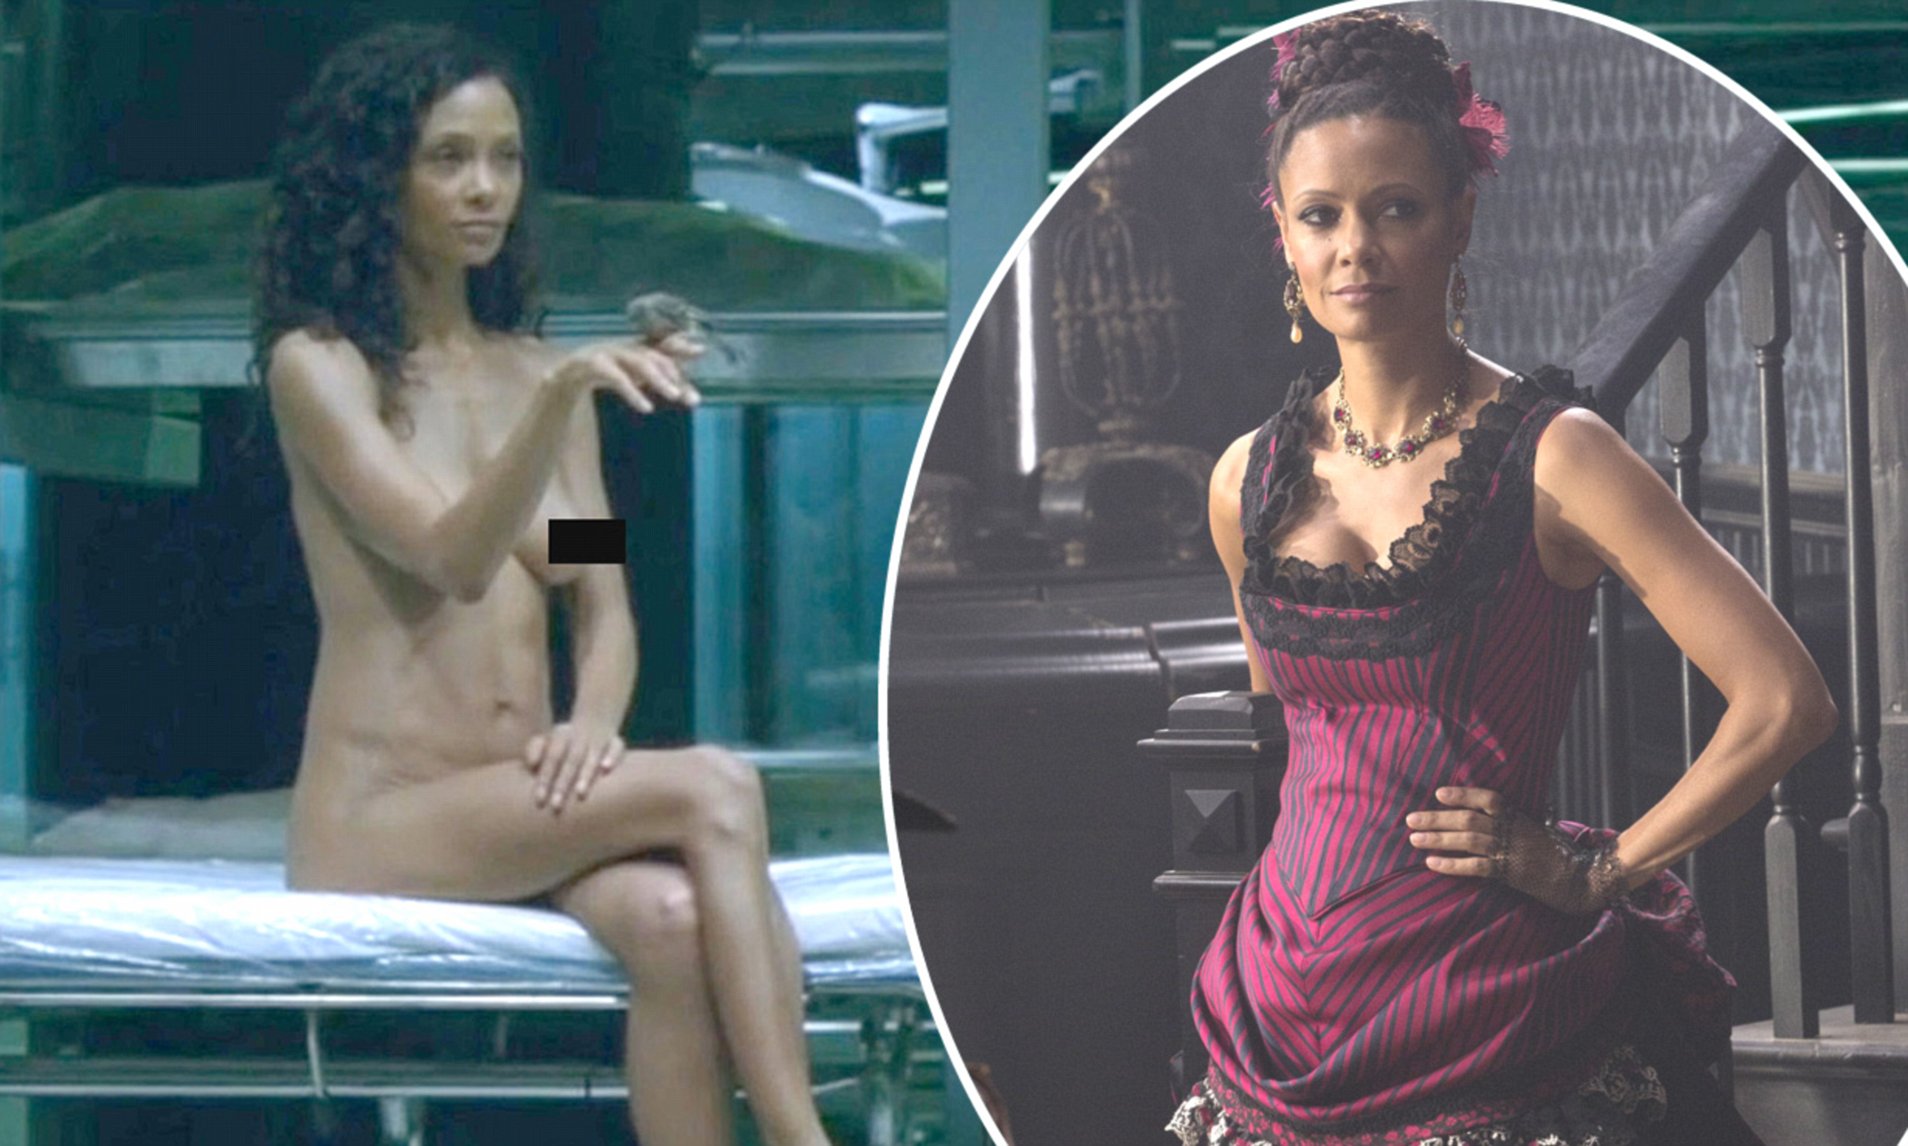 dorothy trahan add thandie newton nude images photo